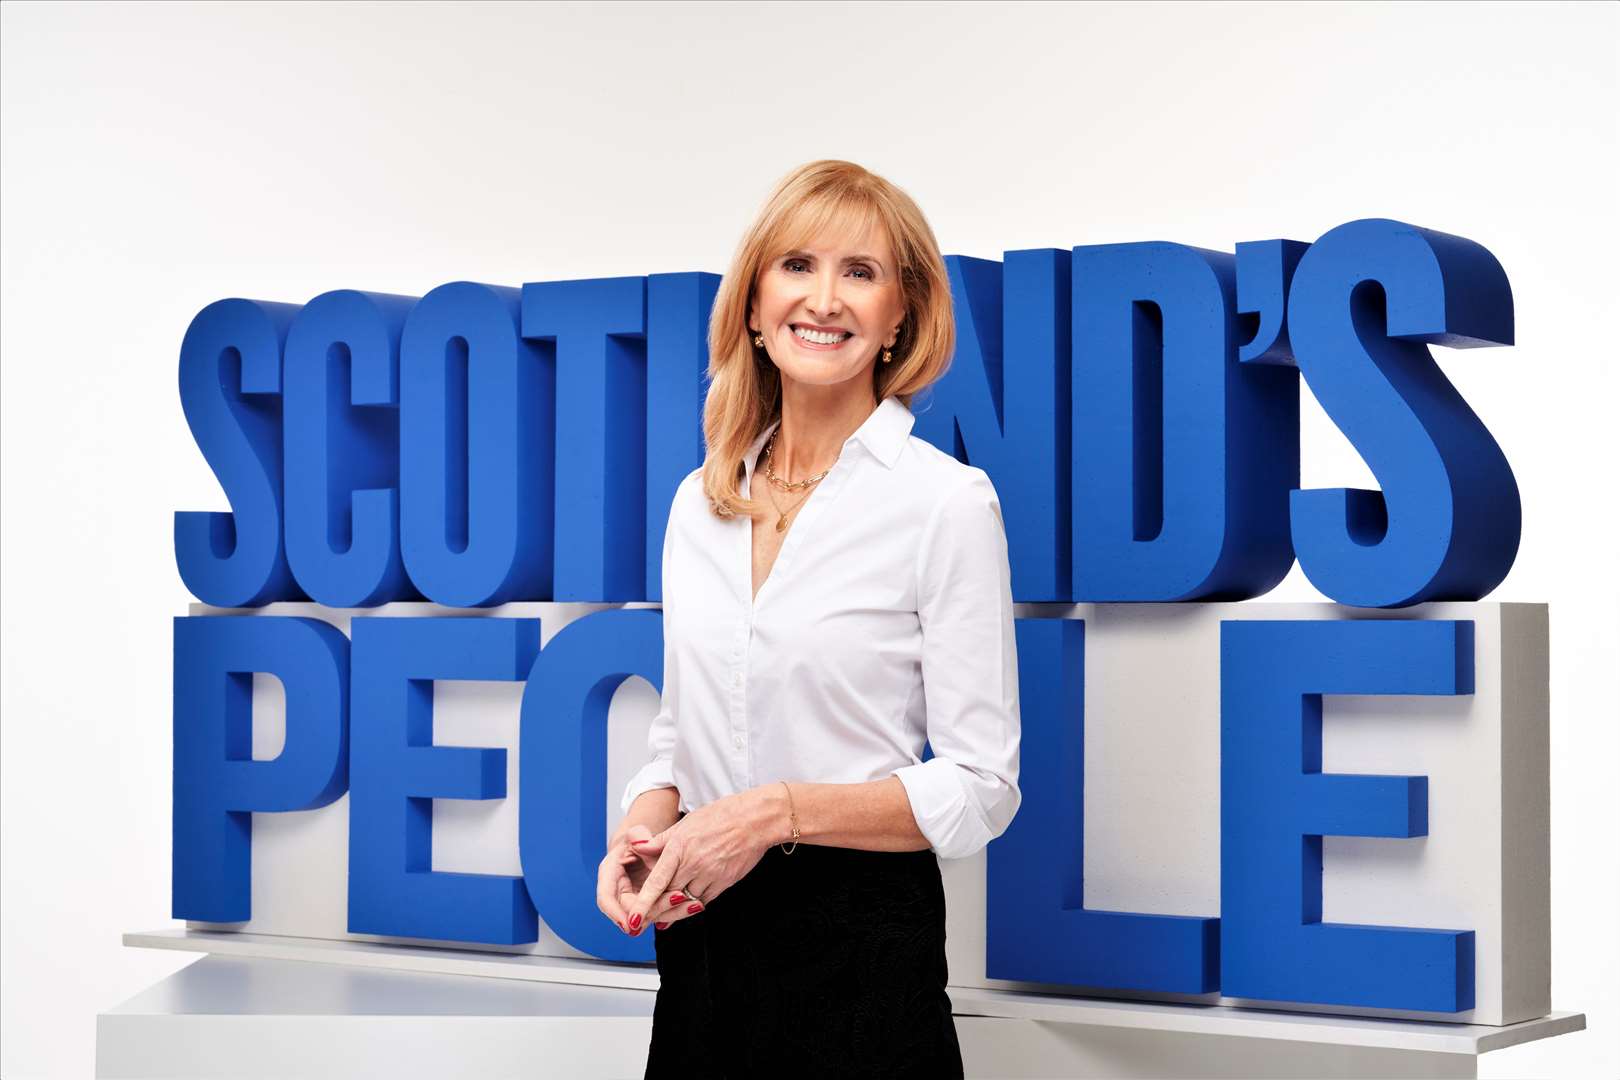 Jackie Bird is looking for Caithness heroes.